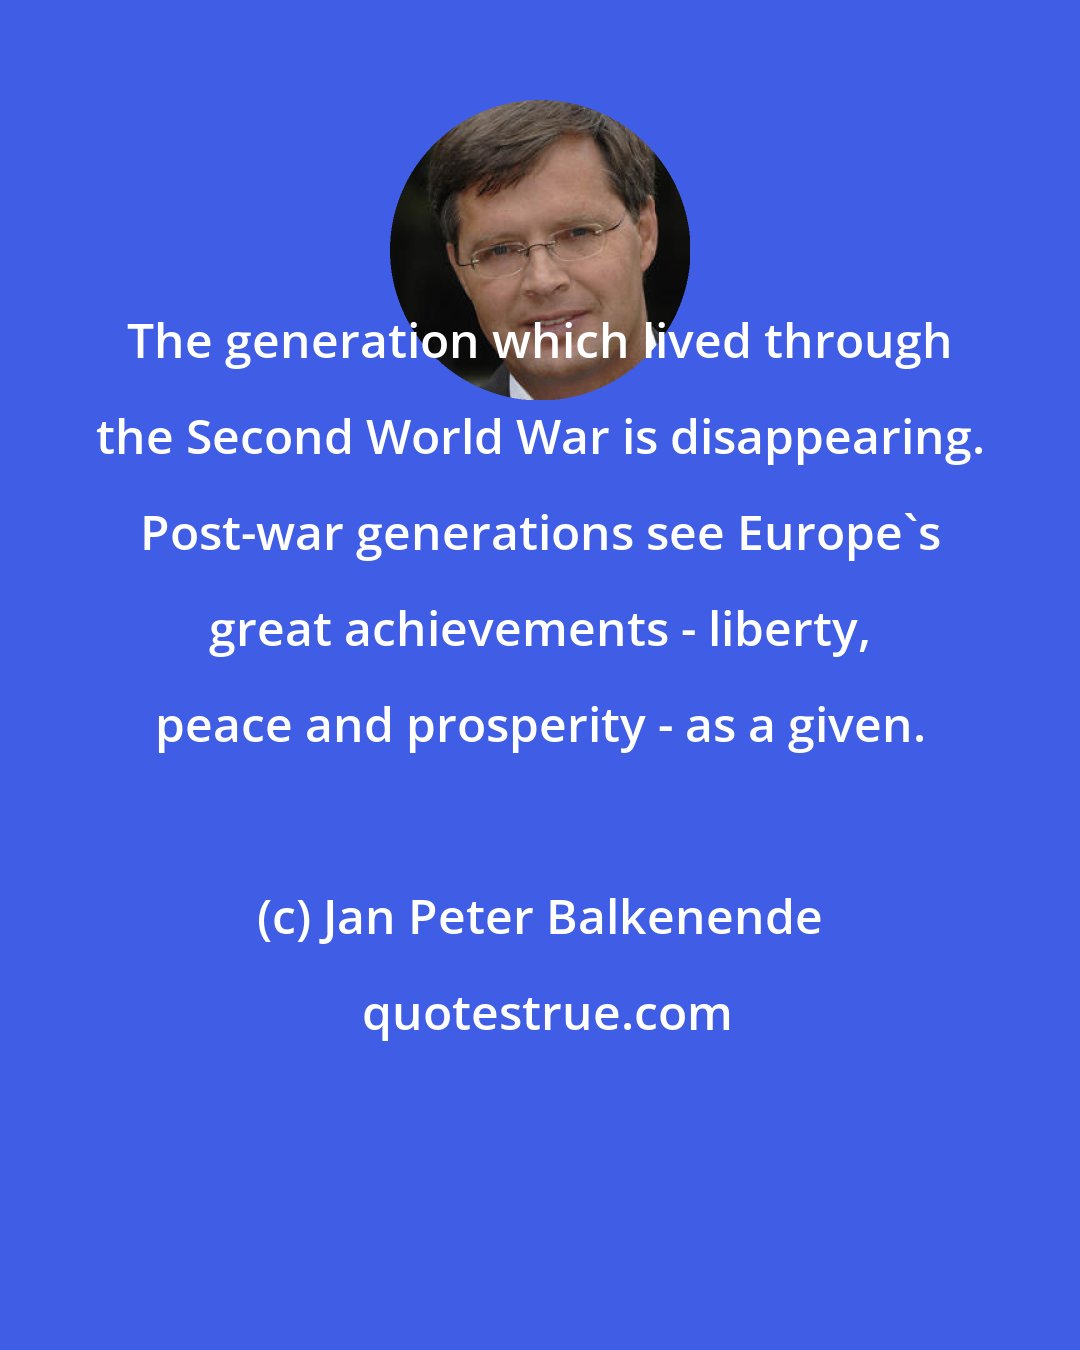 Jan Peter Balkenende: The generation which lived through the Second World War is disappearing. Post-war generations see Europe's great achievements - liberty, peace and prosperity - as a given.